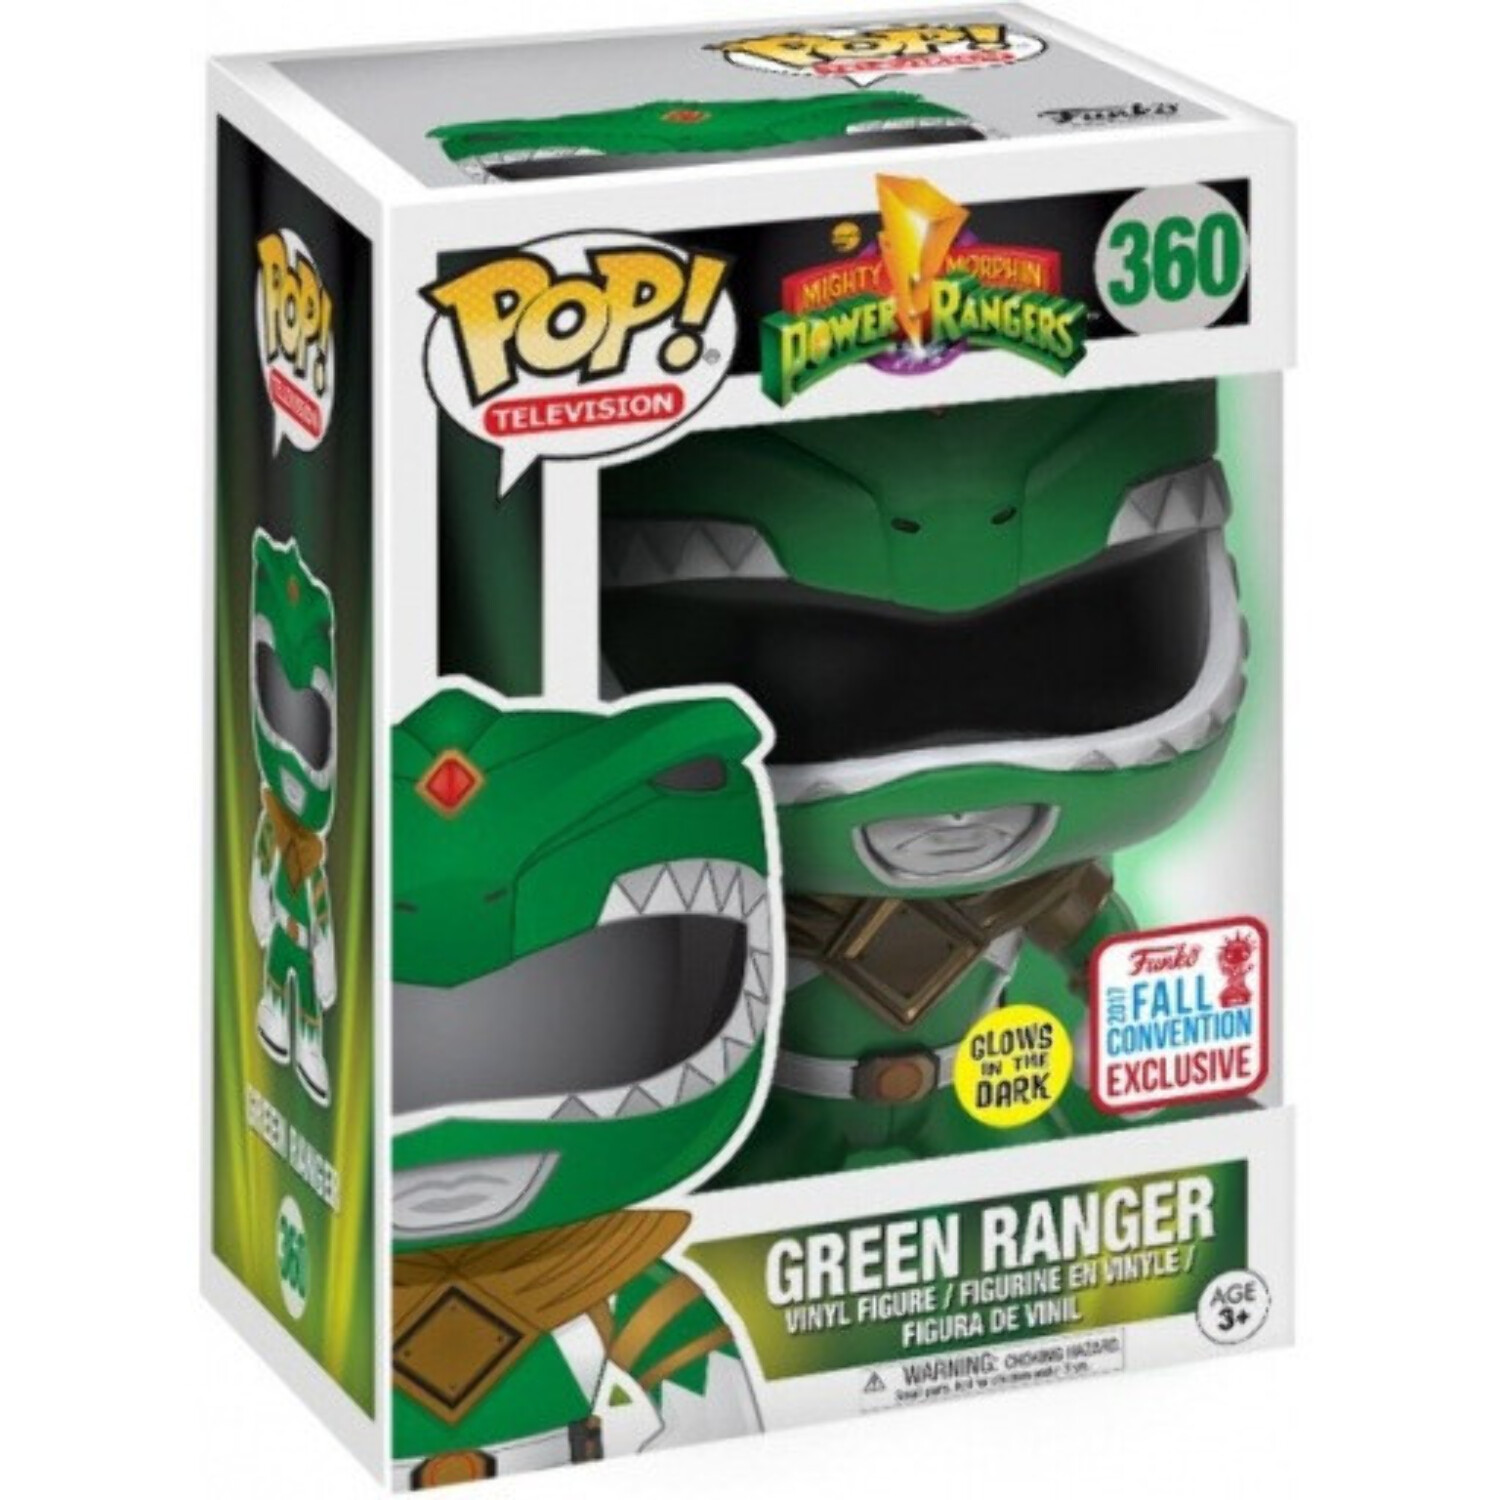 Funko POP Television: Power Rangers - Green Ranger Glow in the Dark - Fall Convention Exclusive - image 2 of 2